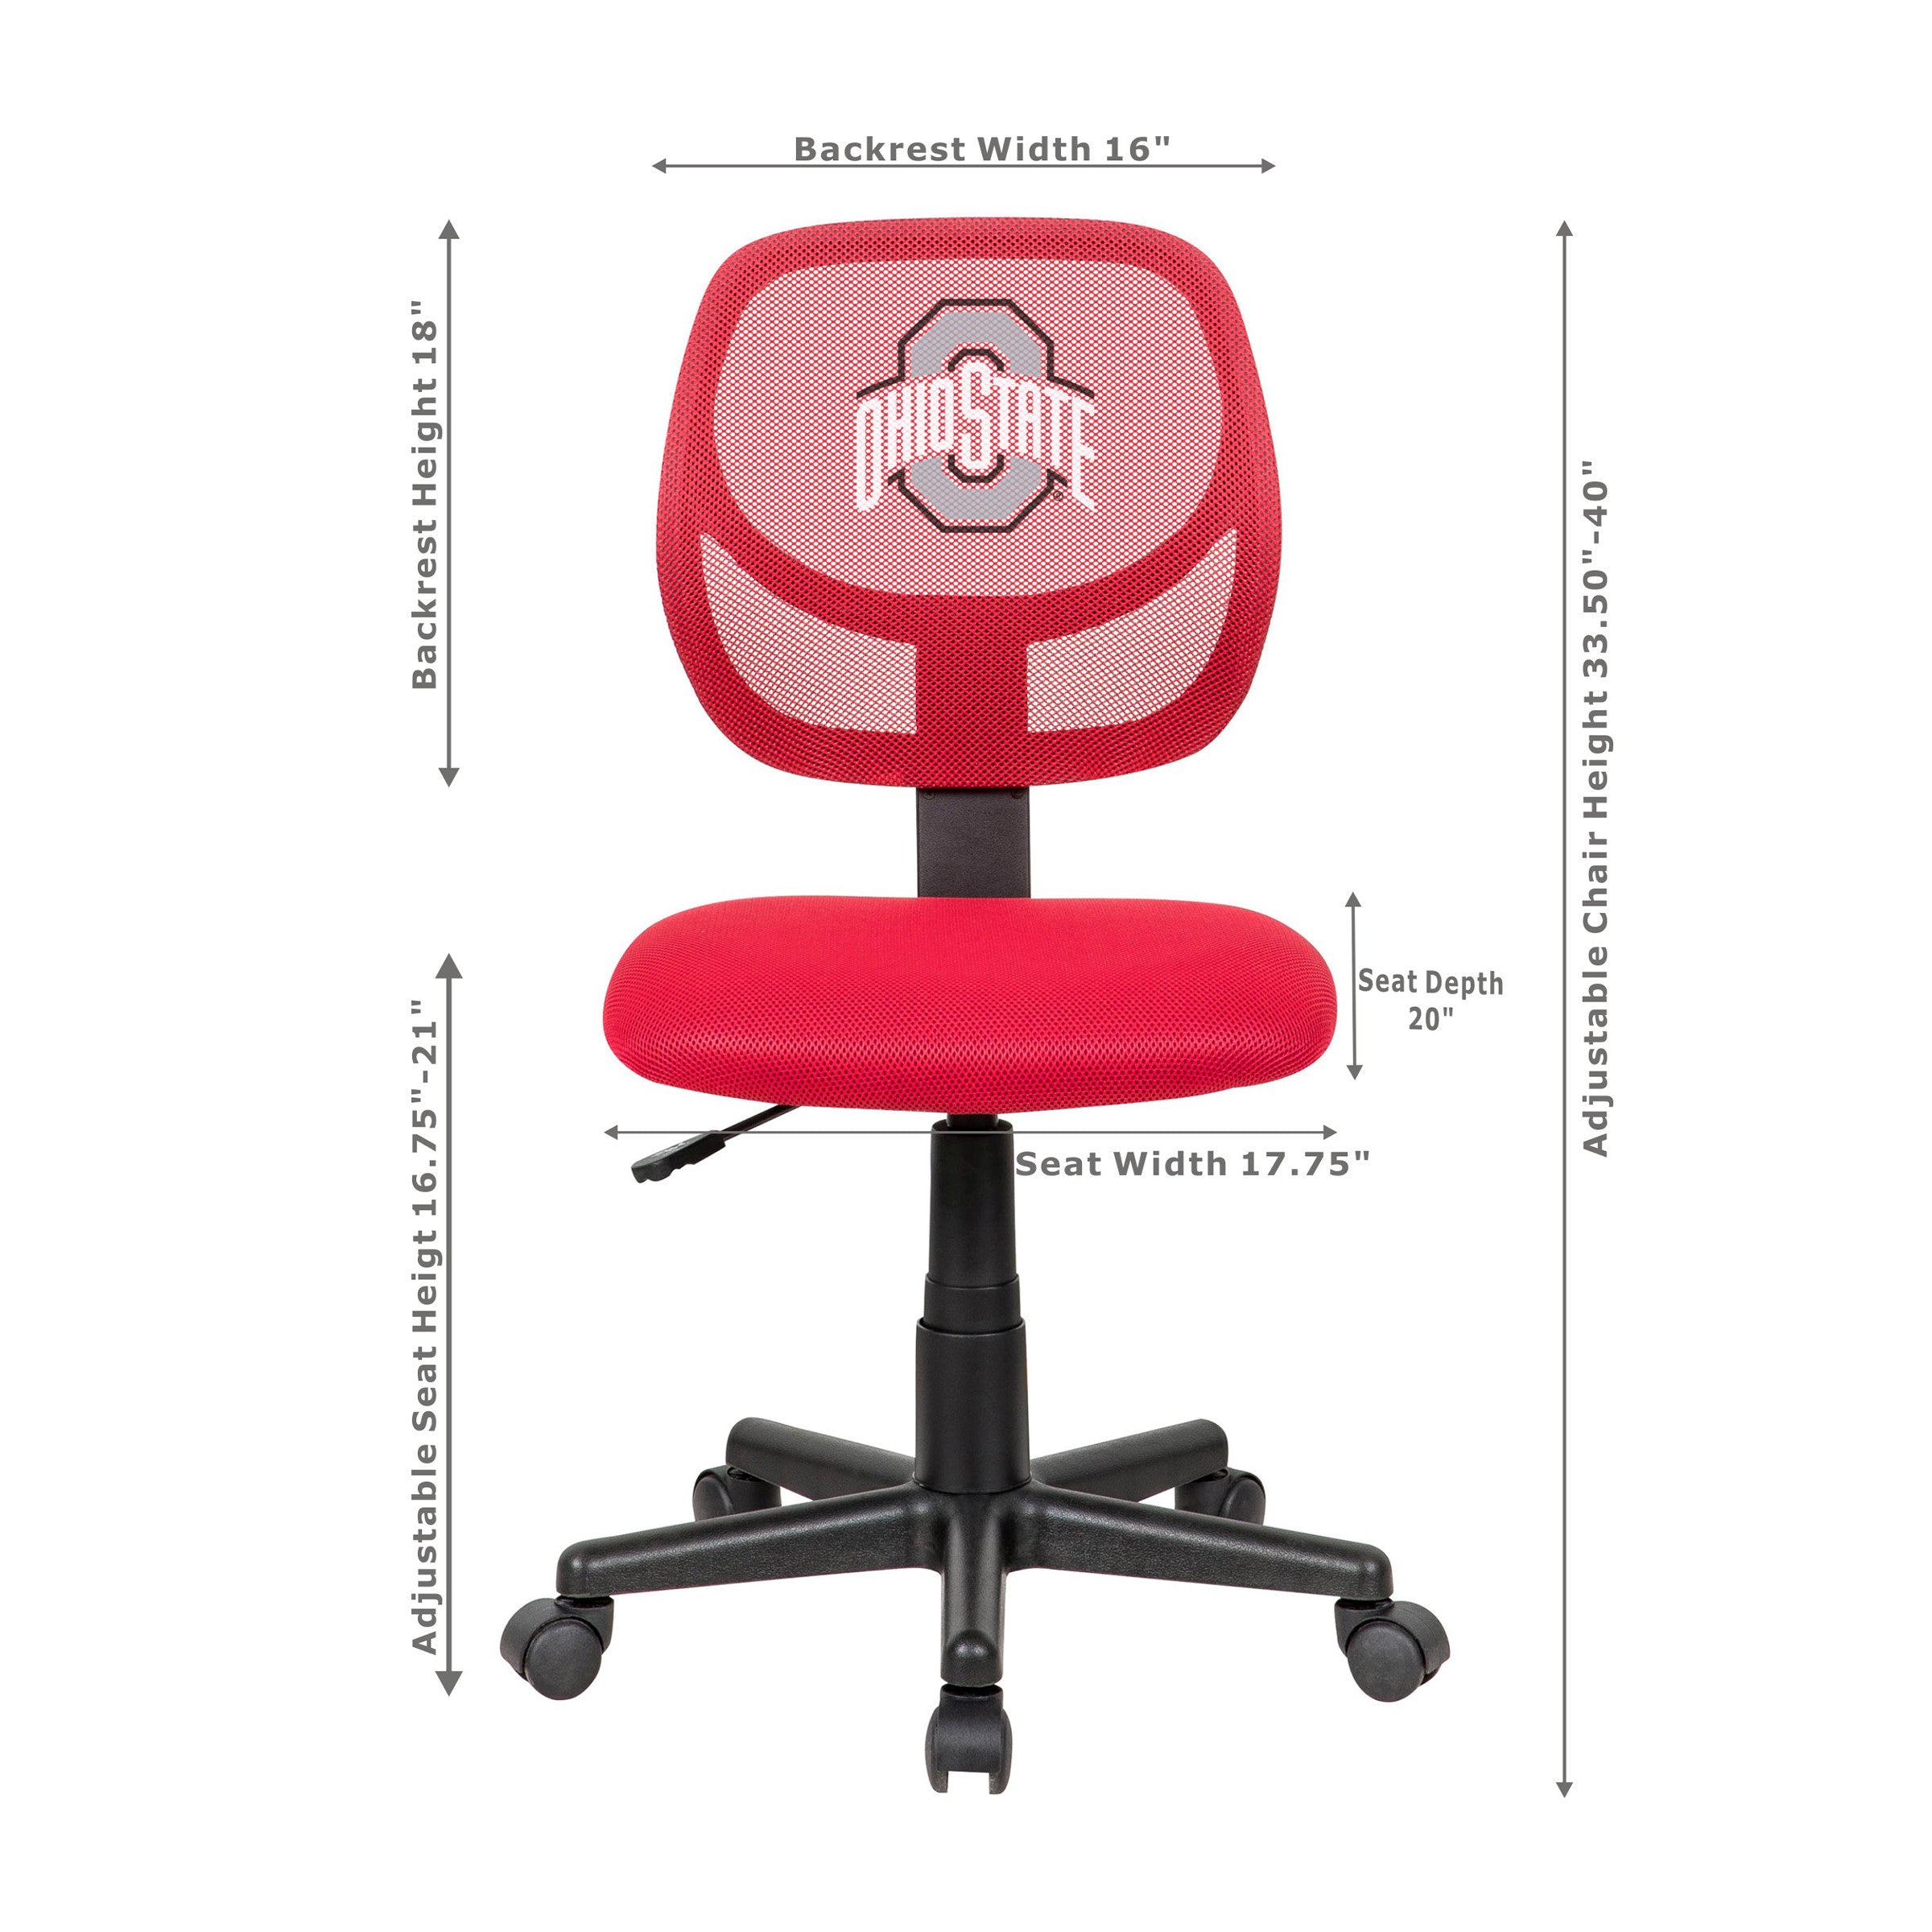 Imperial Ohio State Red Task Chair